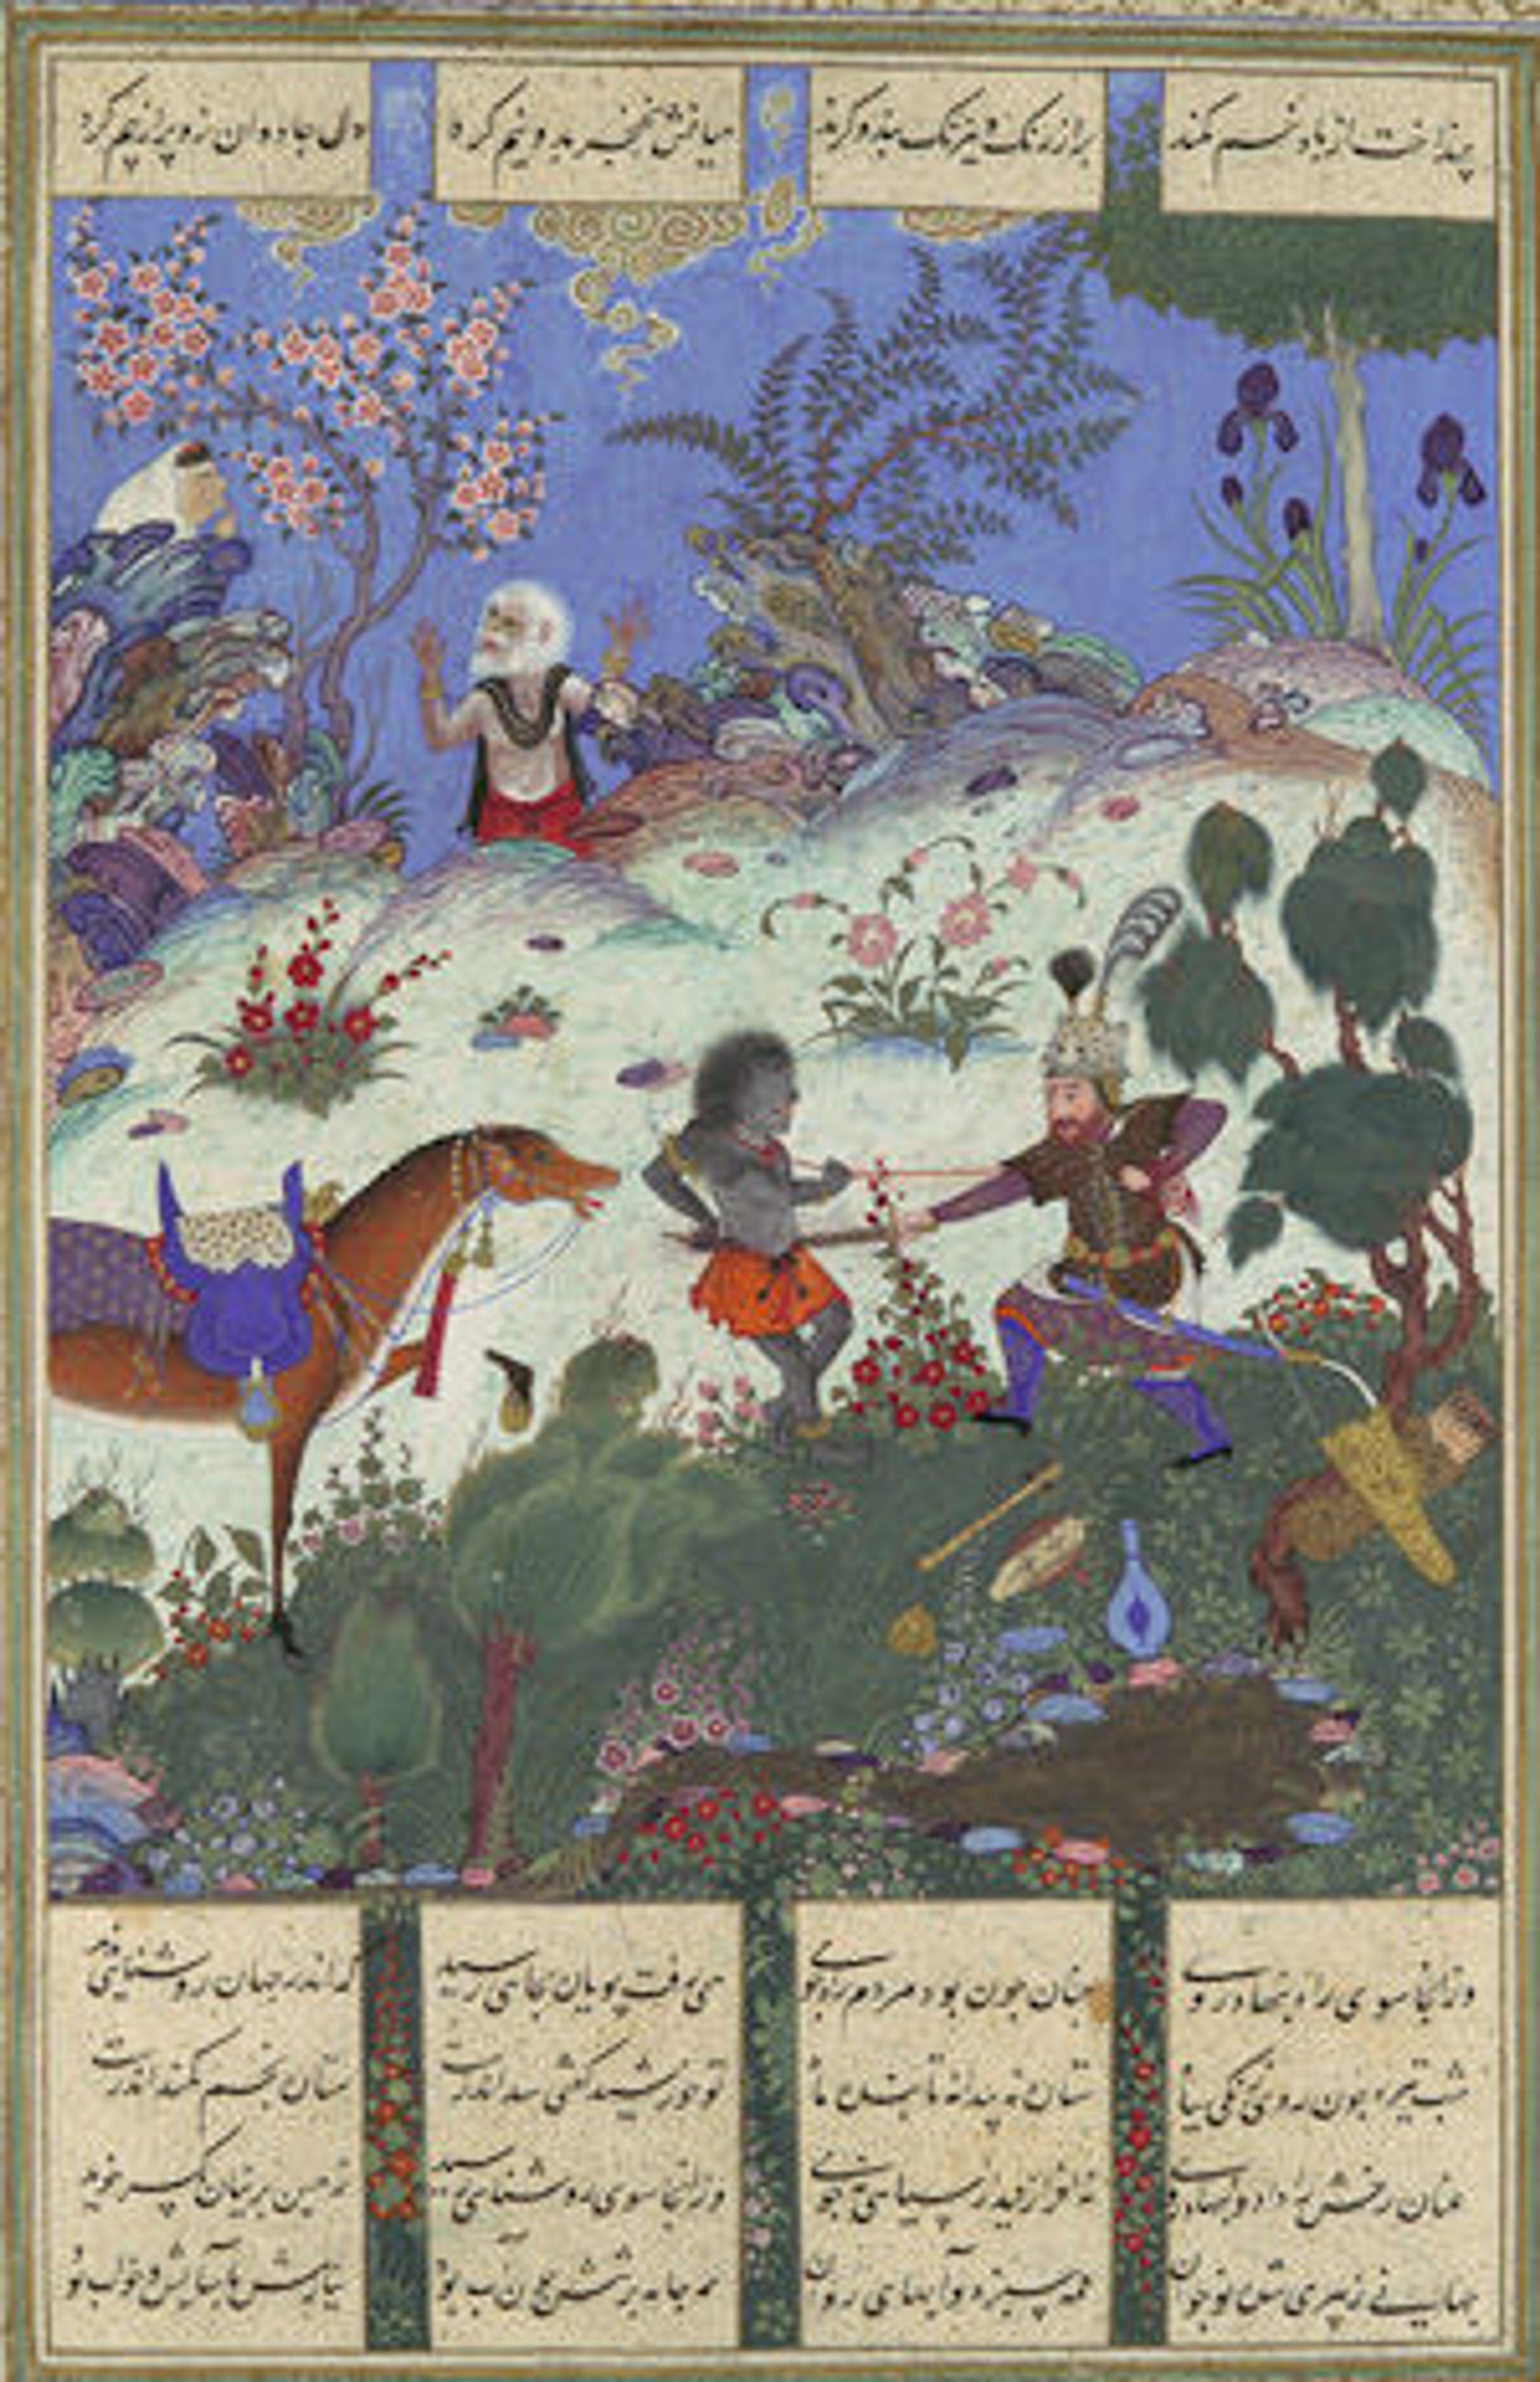 Left: Abu'l Qasim Firdausi (935–1020); painting attributed to Qadimi (active ca. 1525–65). "Rustam's Fourth Course, He Cleaves a Witch", Folio 120v from the Shahnama (Book of Kings) of Shah Tahmasp, ca. 1525. Iran. Islamic. Opaque watercolor, ink, silver, and gold on paper; Painting: H. 11 3/16 in. (28.5 cm), W. 7 5/16 in. (18.6 cm). The Metropolitan Museum of Art, New York, Gift of Arthur A. Houghton Jr., 1970 (1970.301.17)